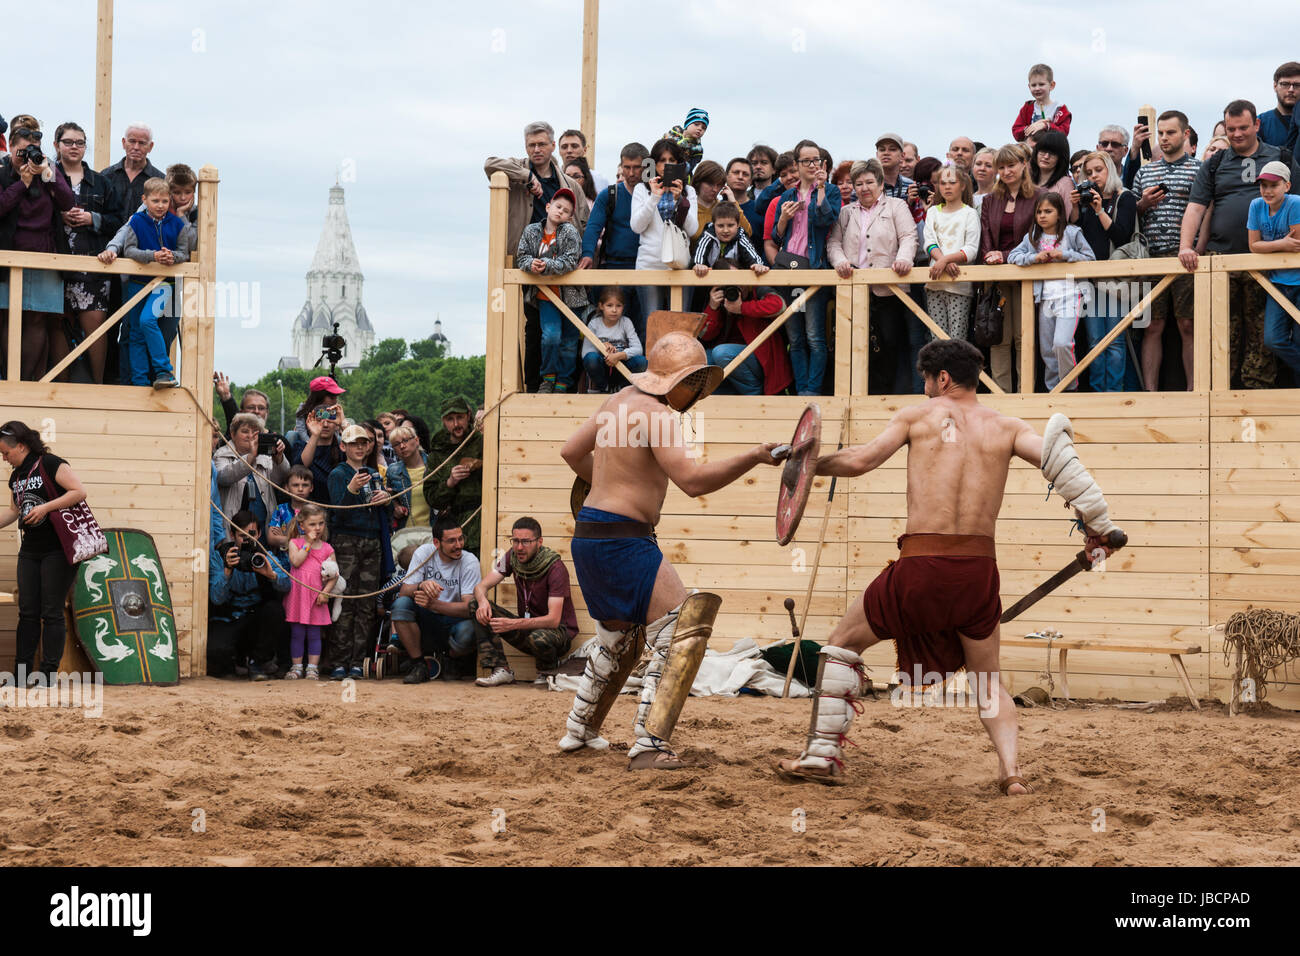 Moscow, Russia. 10th June, 2017. International Times & Epochs history reenactment festival in under way in Moscow. About 6000 reenactors from around the world take part in this 12 day long festival. They represent many history periods from times of ancient Greece and Rome to XX century on more than 15 festival areas all over the city. Ancient Rome period everyday life scenes, gladiator games, battles with Germans and Dacians and other events are presented in Kolomenskoe public park. Gladiator games in circus are still popular among the public. Credit: Alex's Pictures/Alamy Live News Stock Photo